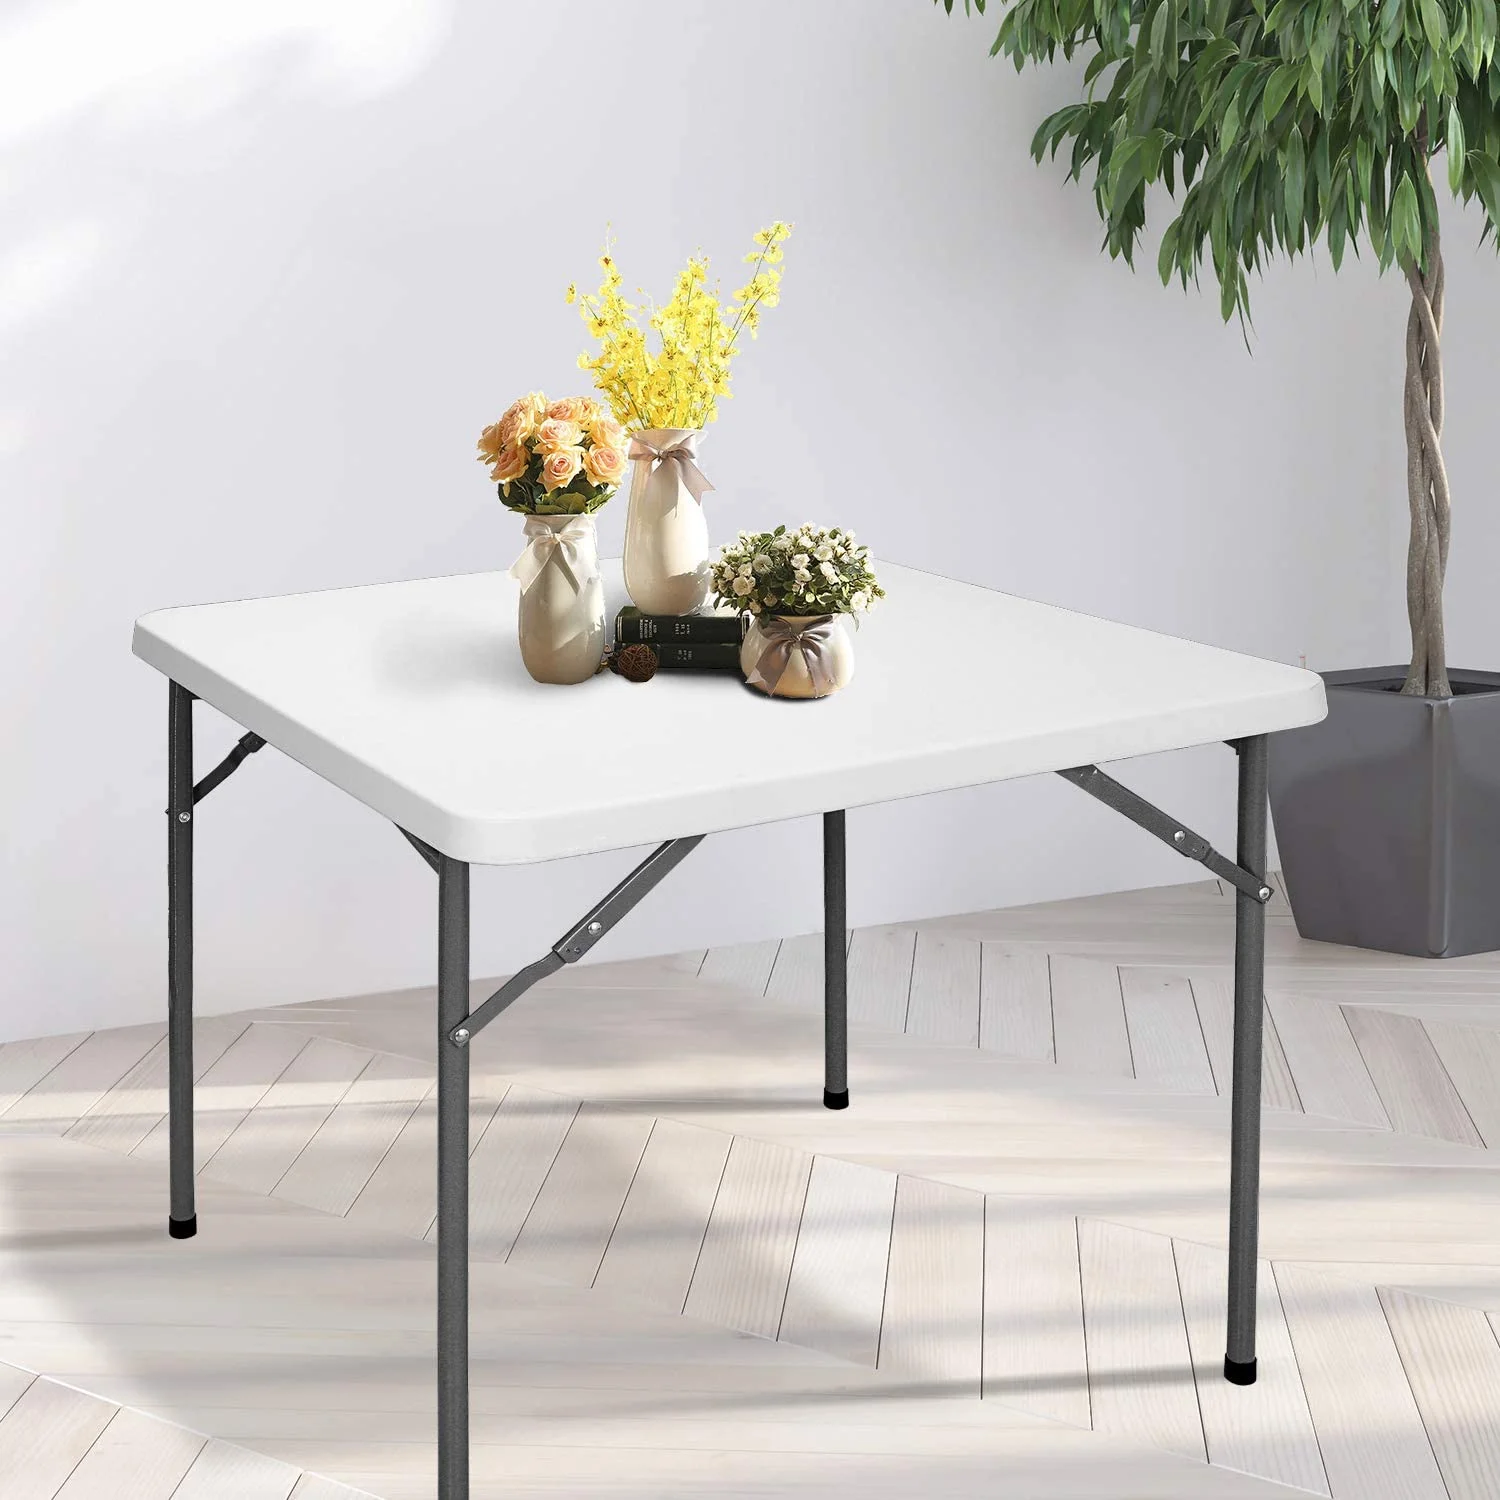 6FT Portable Folding White Trestle Table Heavy Duty Plastic Camping Garden  Party--One Piece - China Rectangle Folding Table, 183cm